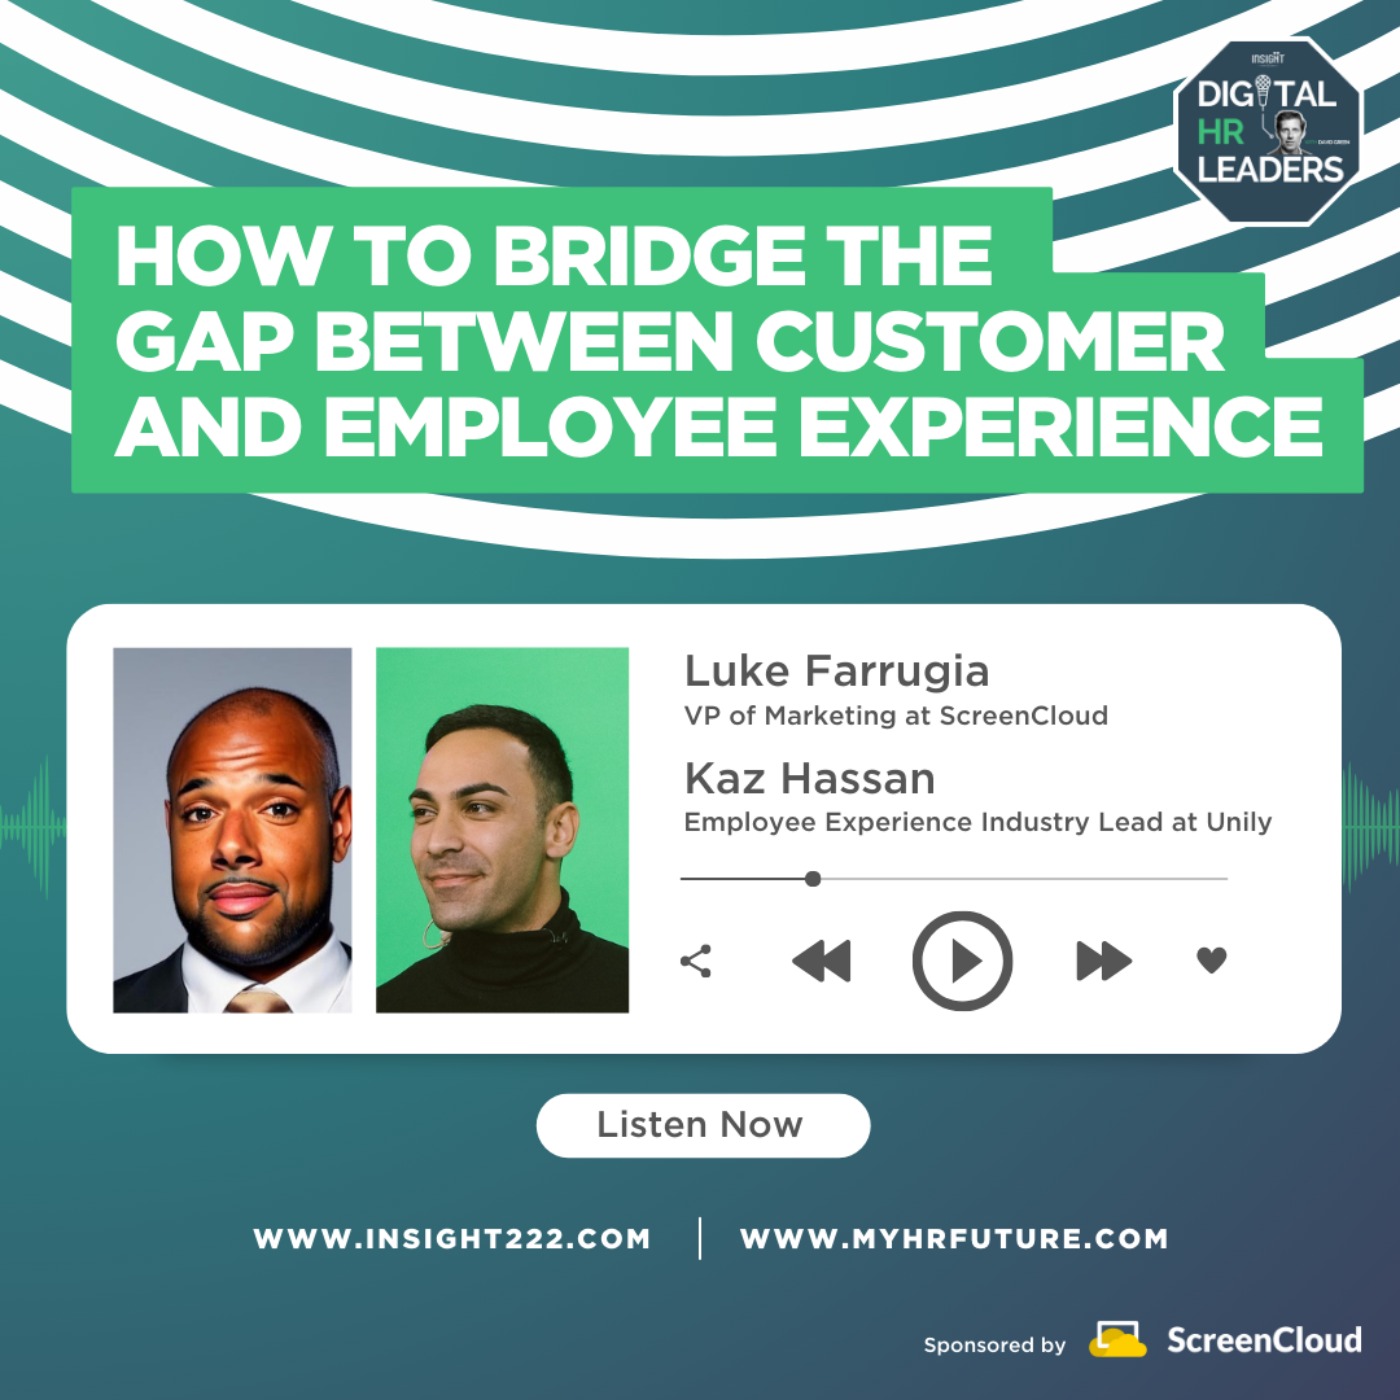 How to Bridge the Gap Between Customer and Employee Experience (an Interview with Luke Farrugia & Kaz Hassan)